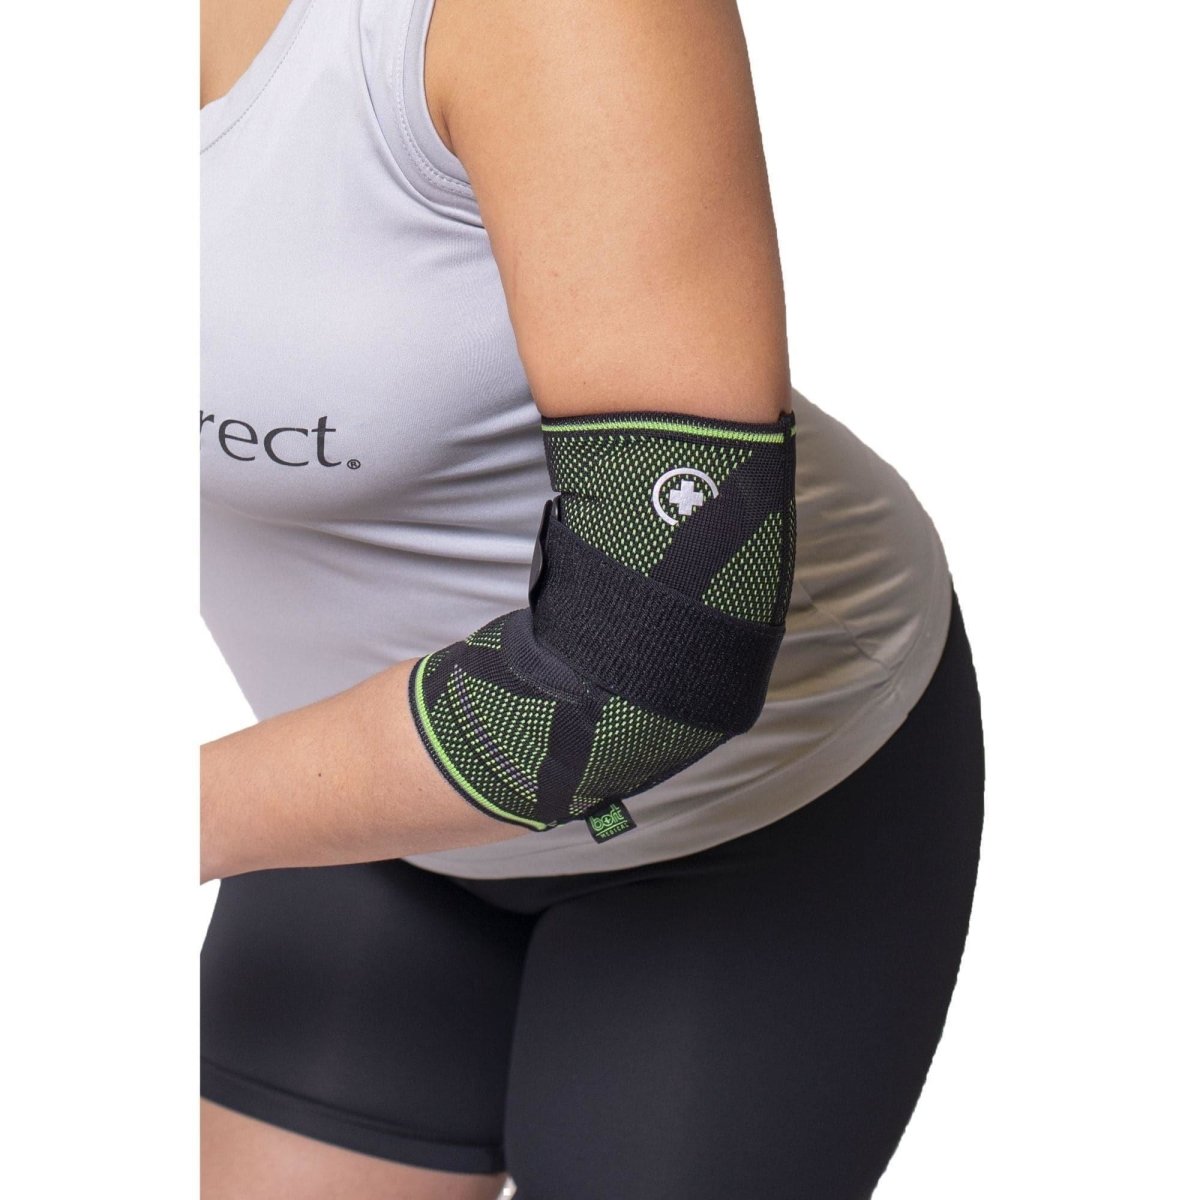 Knit Elbow Compression Sleeve with Strap - Bort by Brace Direct - ARB122600-Reg-S - Brace Direct